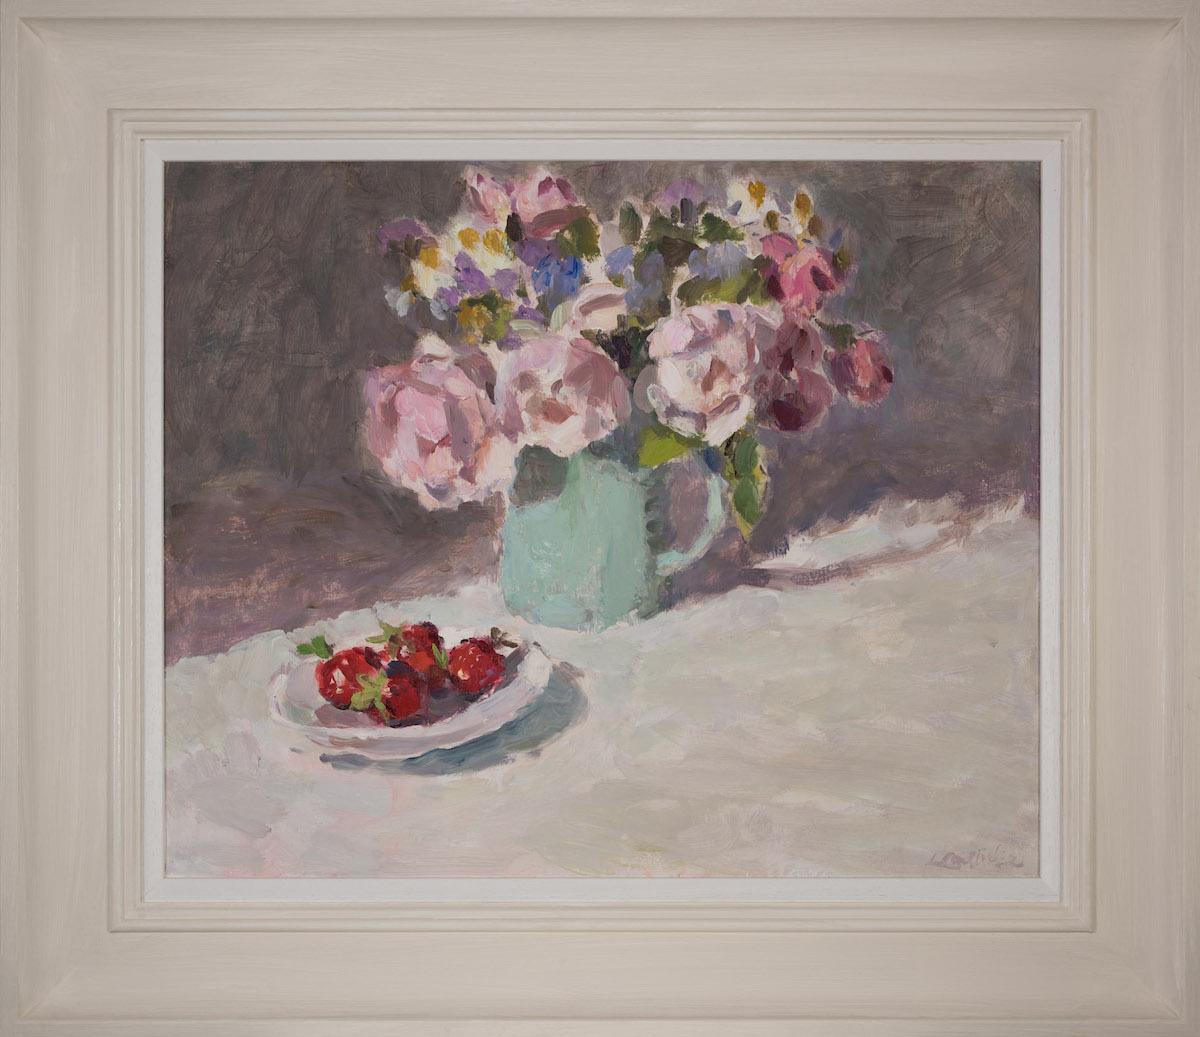 Lynne Cartlidge  Landscape Painting - Roses in Blue Jug with Strawberries by Lynne Cartlidge, Impressionist inspired 